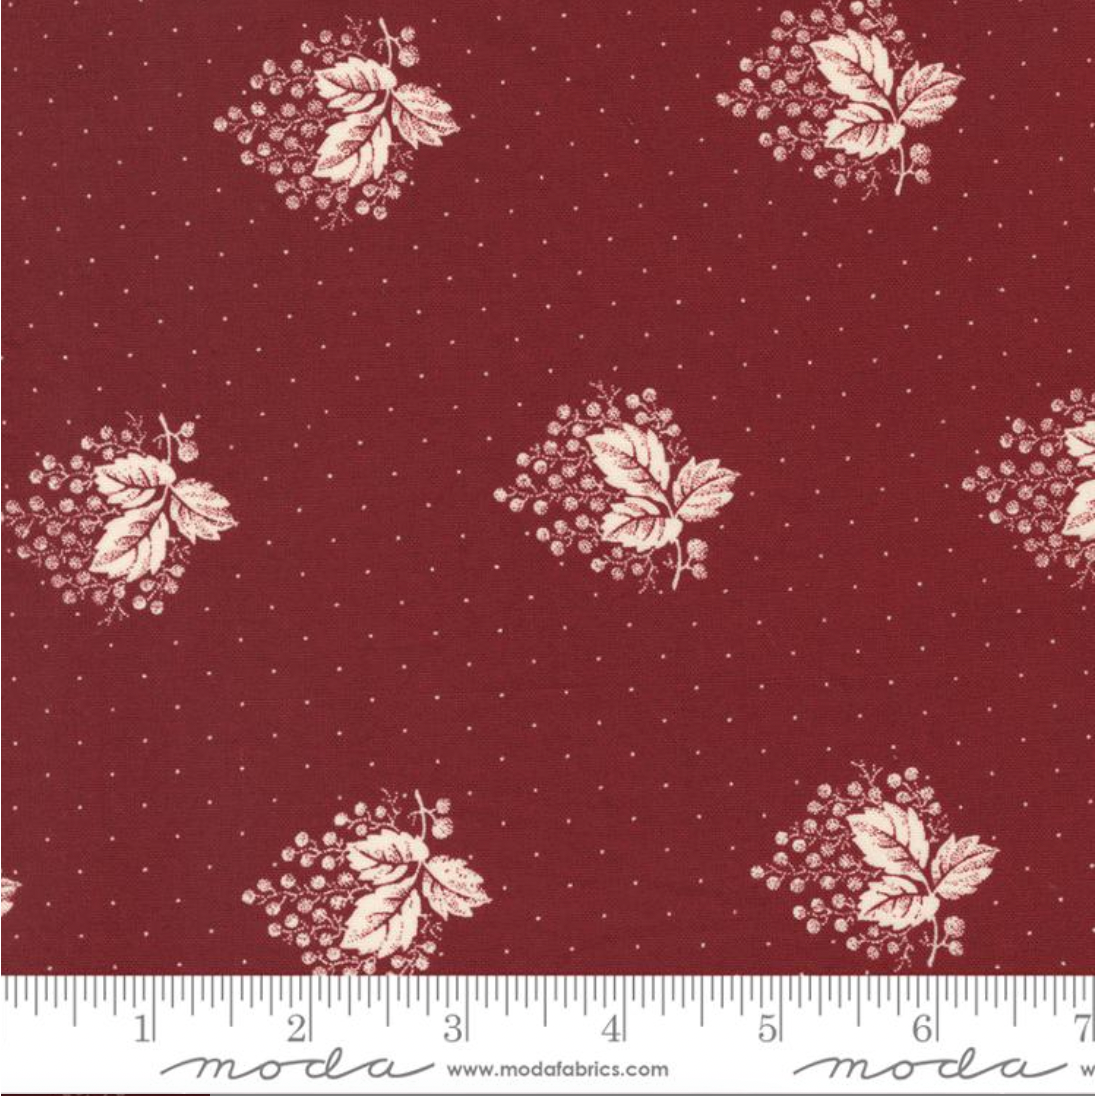 Red and White Gatherings ~ Leaf Spray Burgundy 49192 15